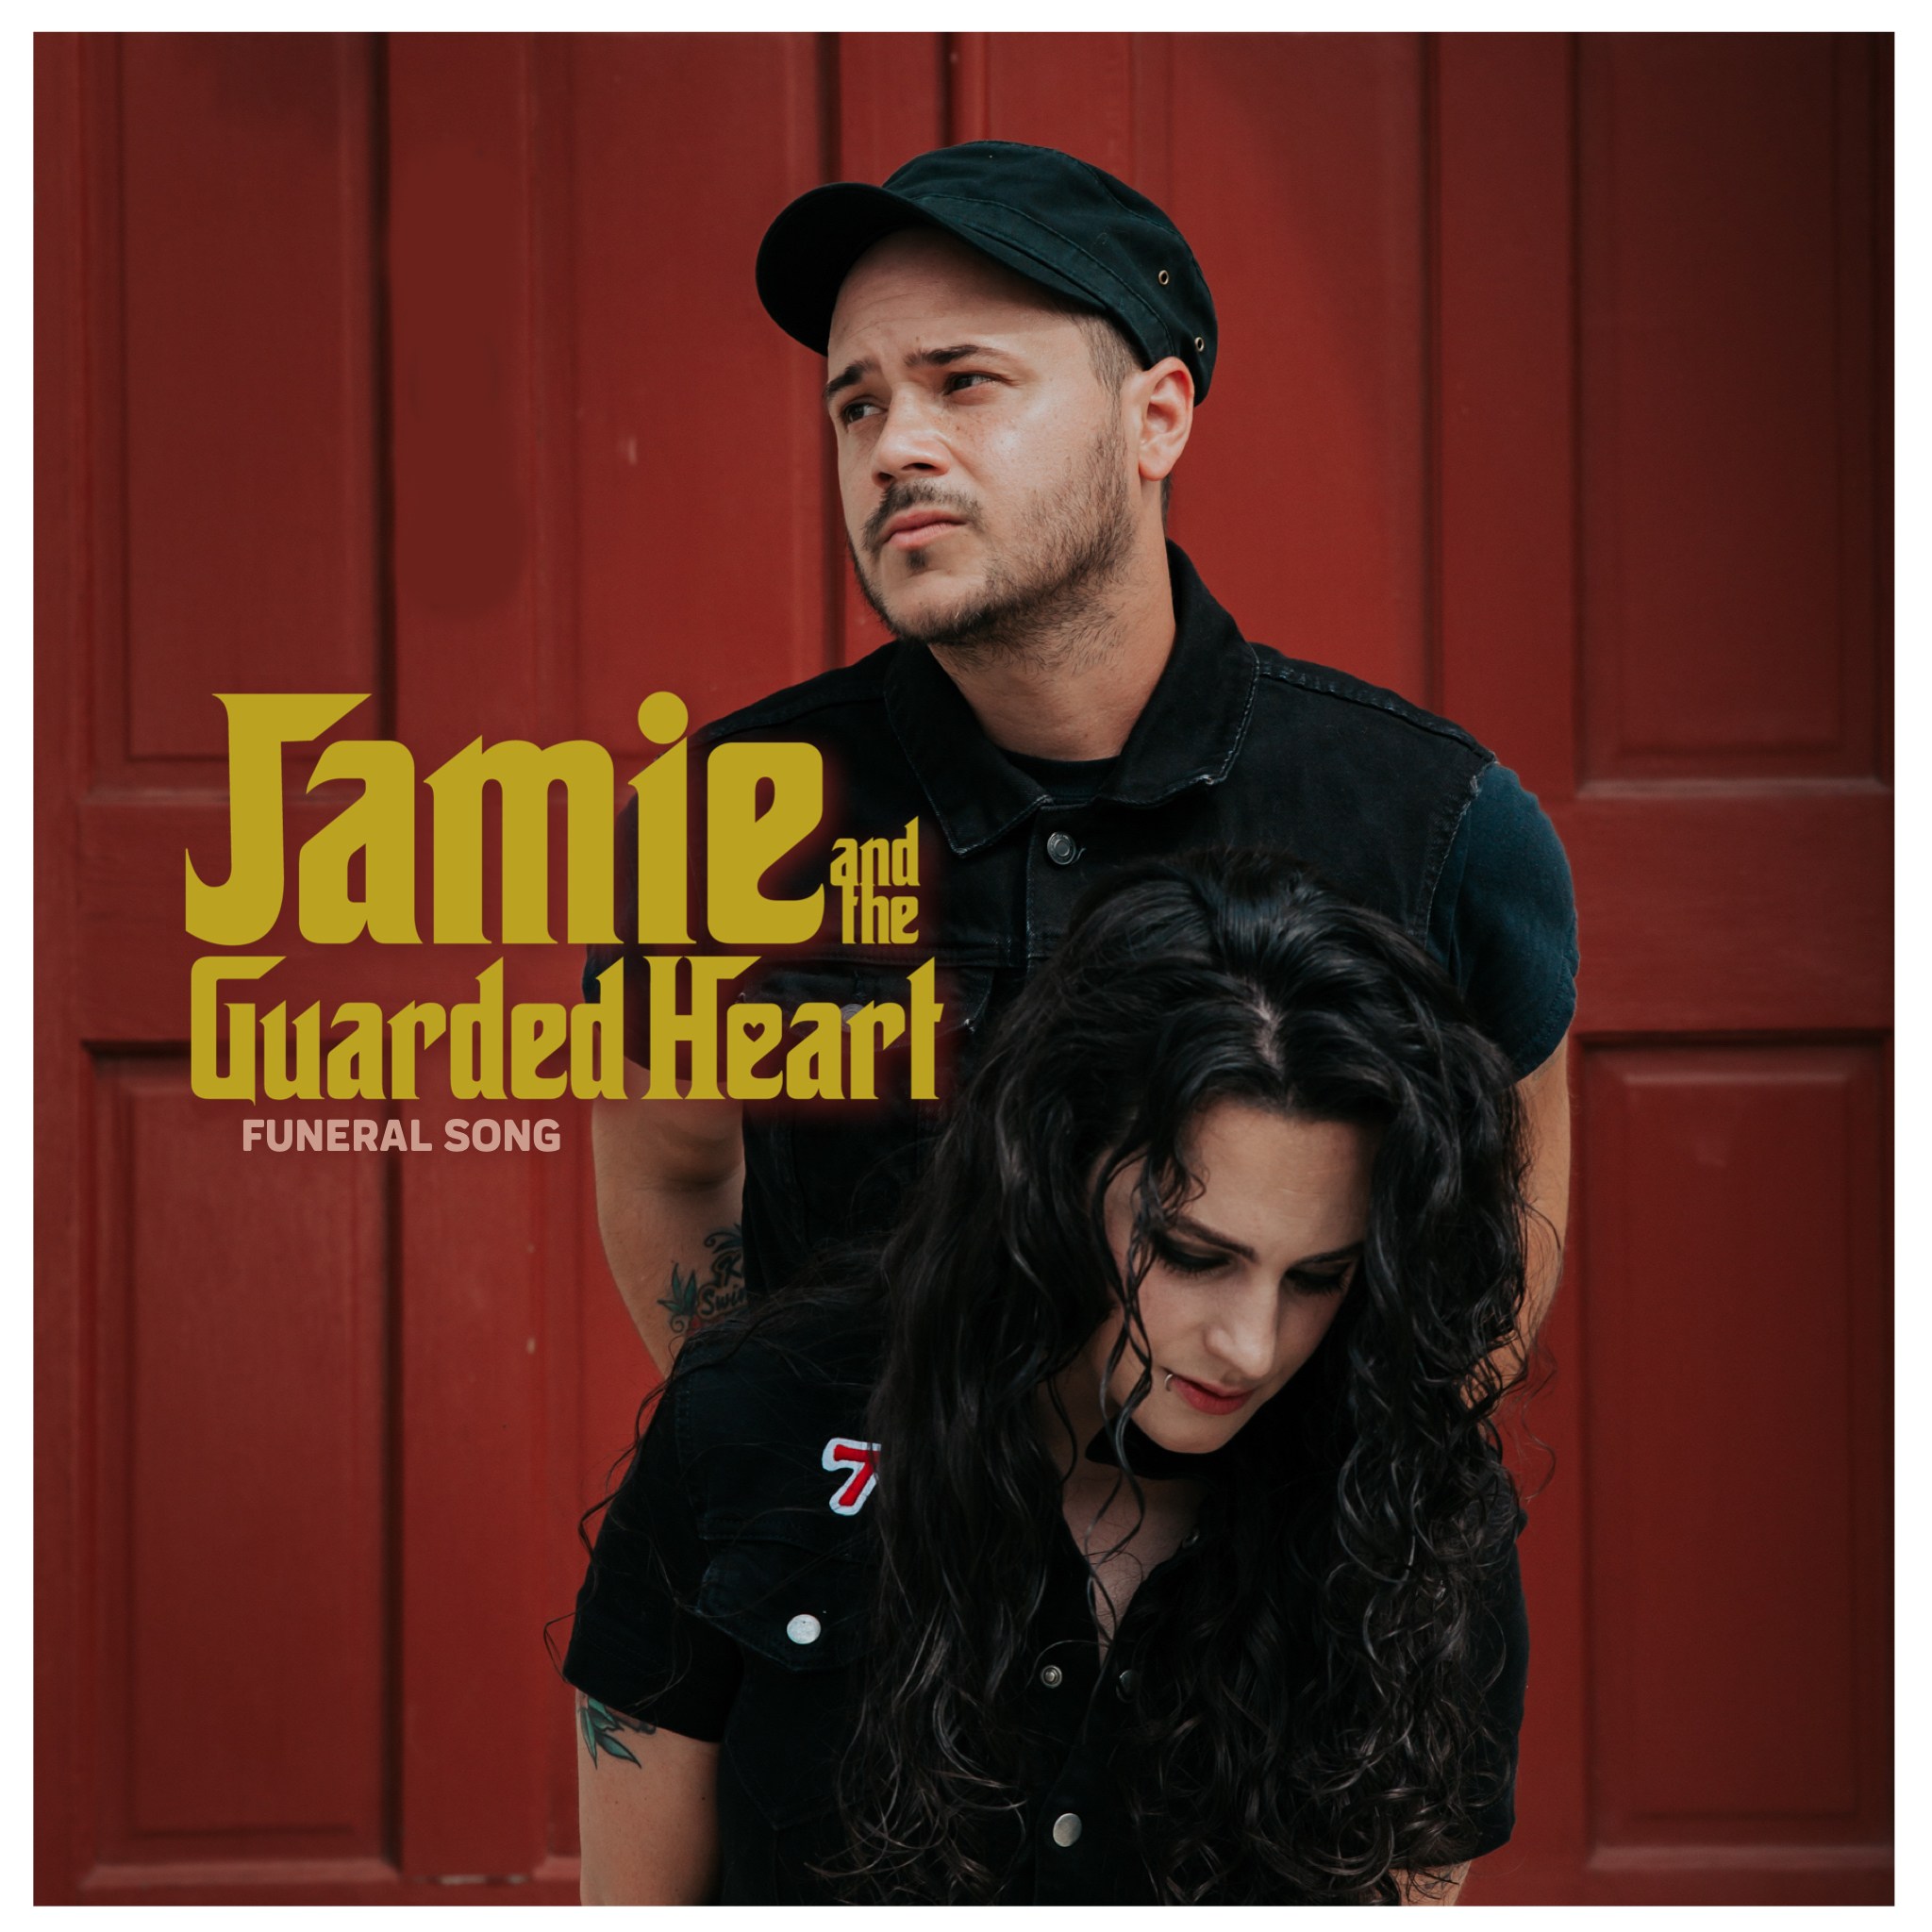 Grateful Web Interview with Jamie and the Guarded Heart